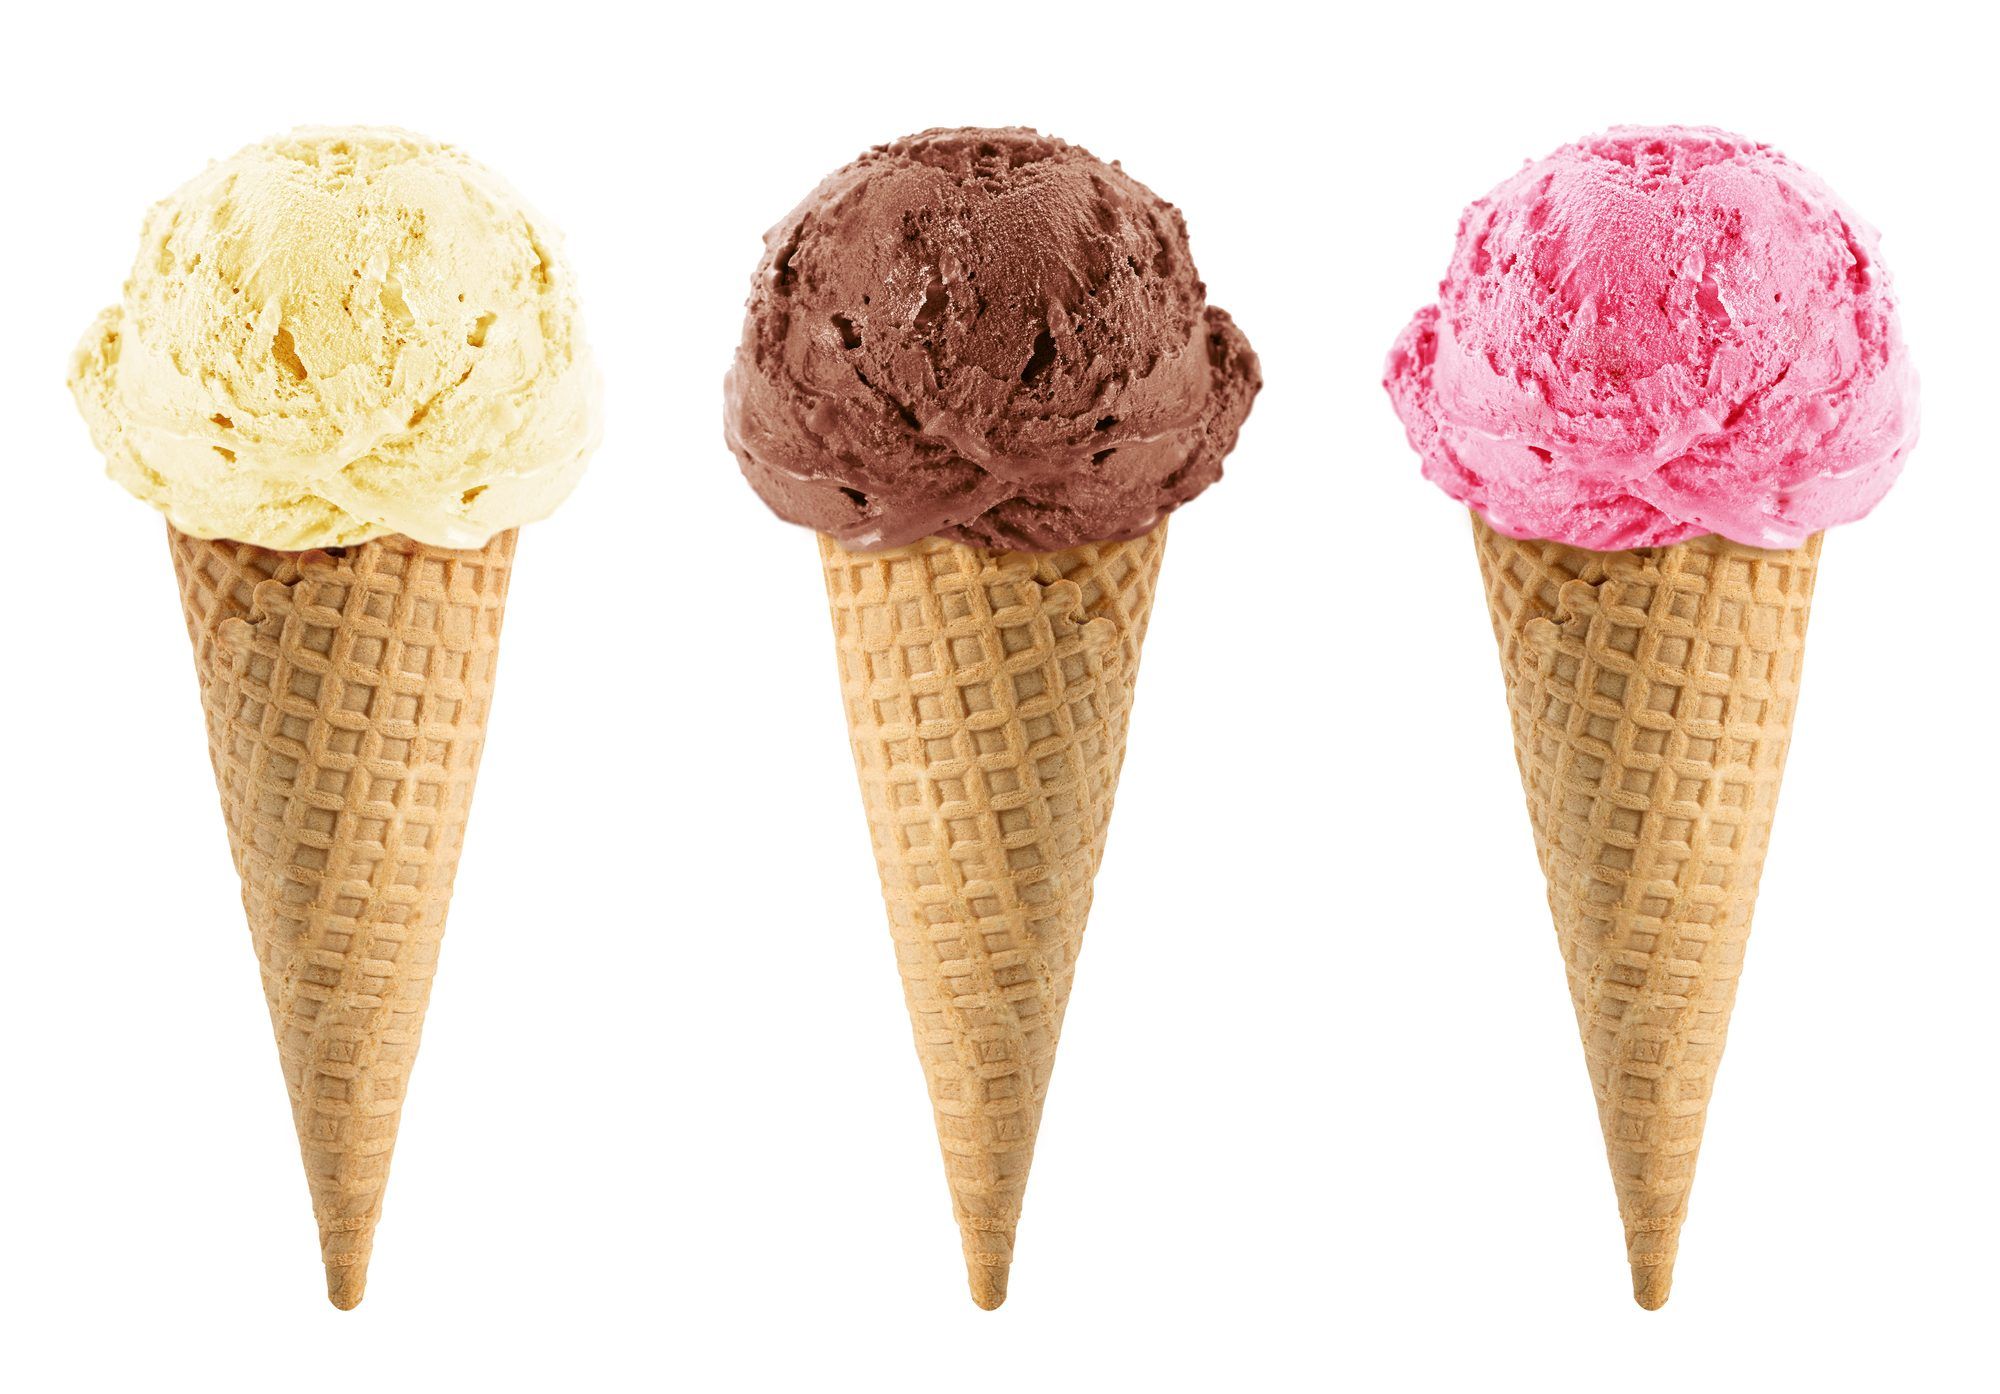 100+ Velvet Ice Cream Products Yanked After Listeria Concerns